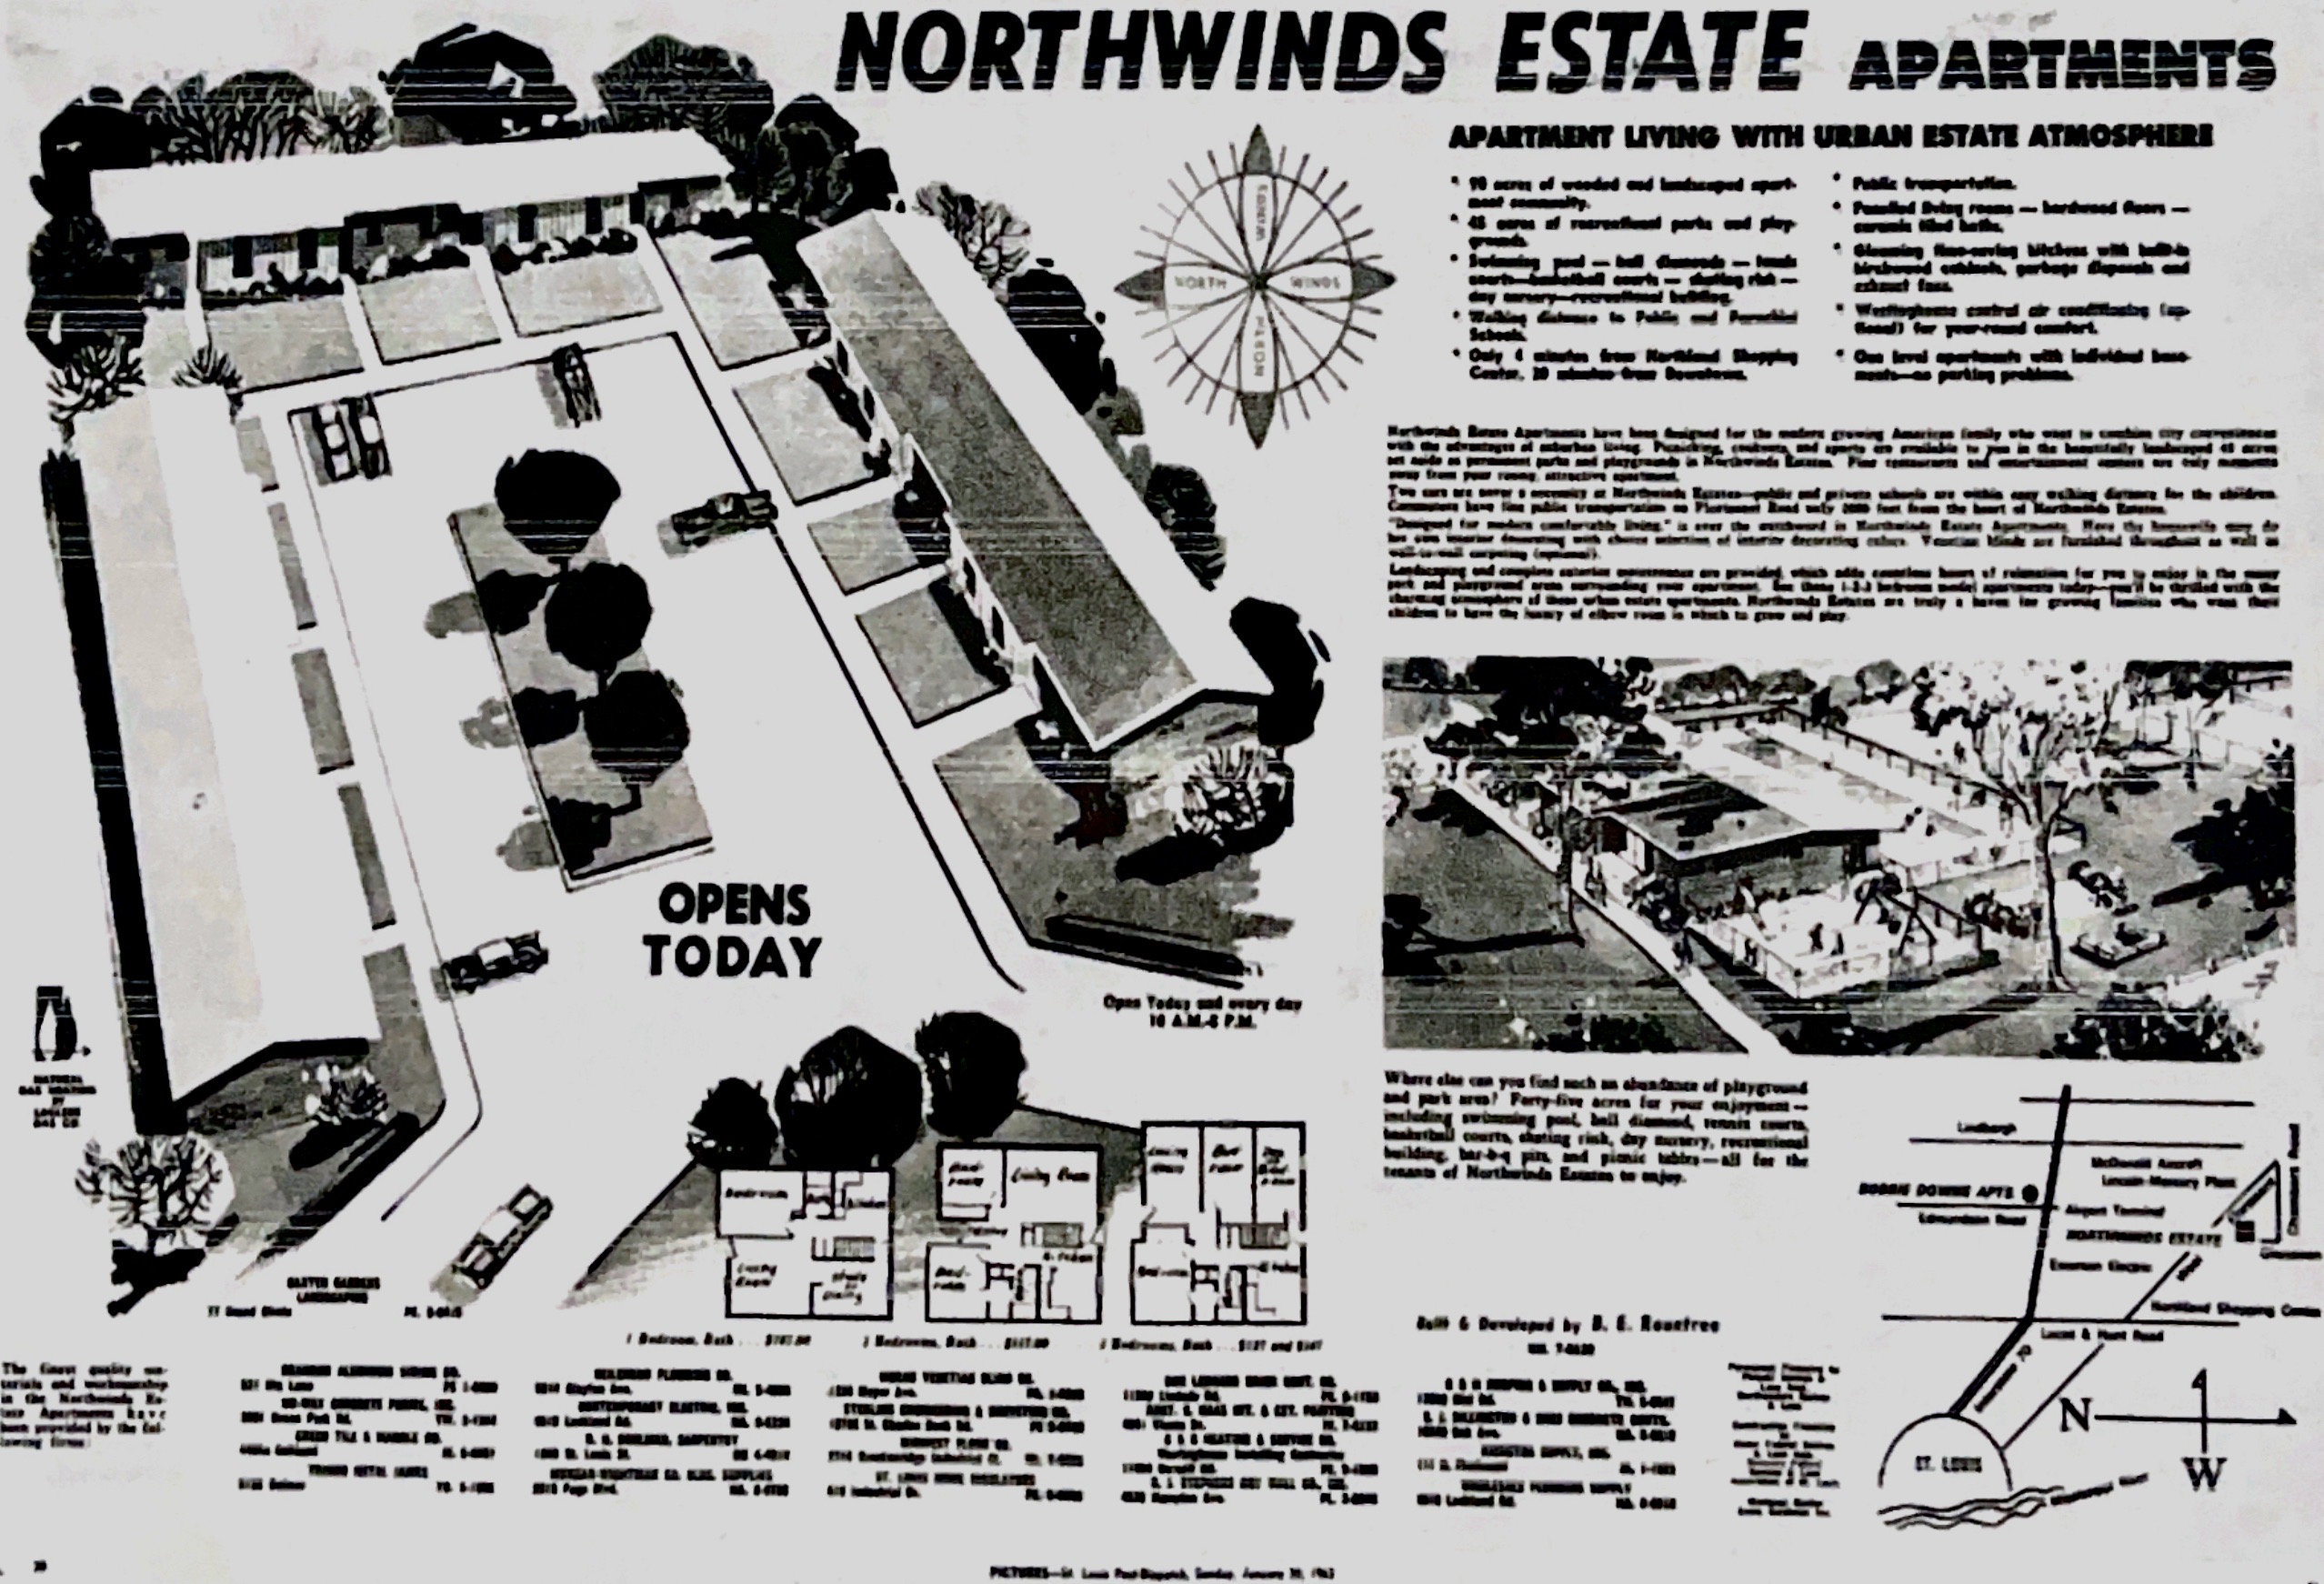 NORTHWINDS ESTATES promotional ad. St. Louis Post-Dispatch, January 20, 1963. 